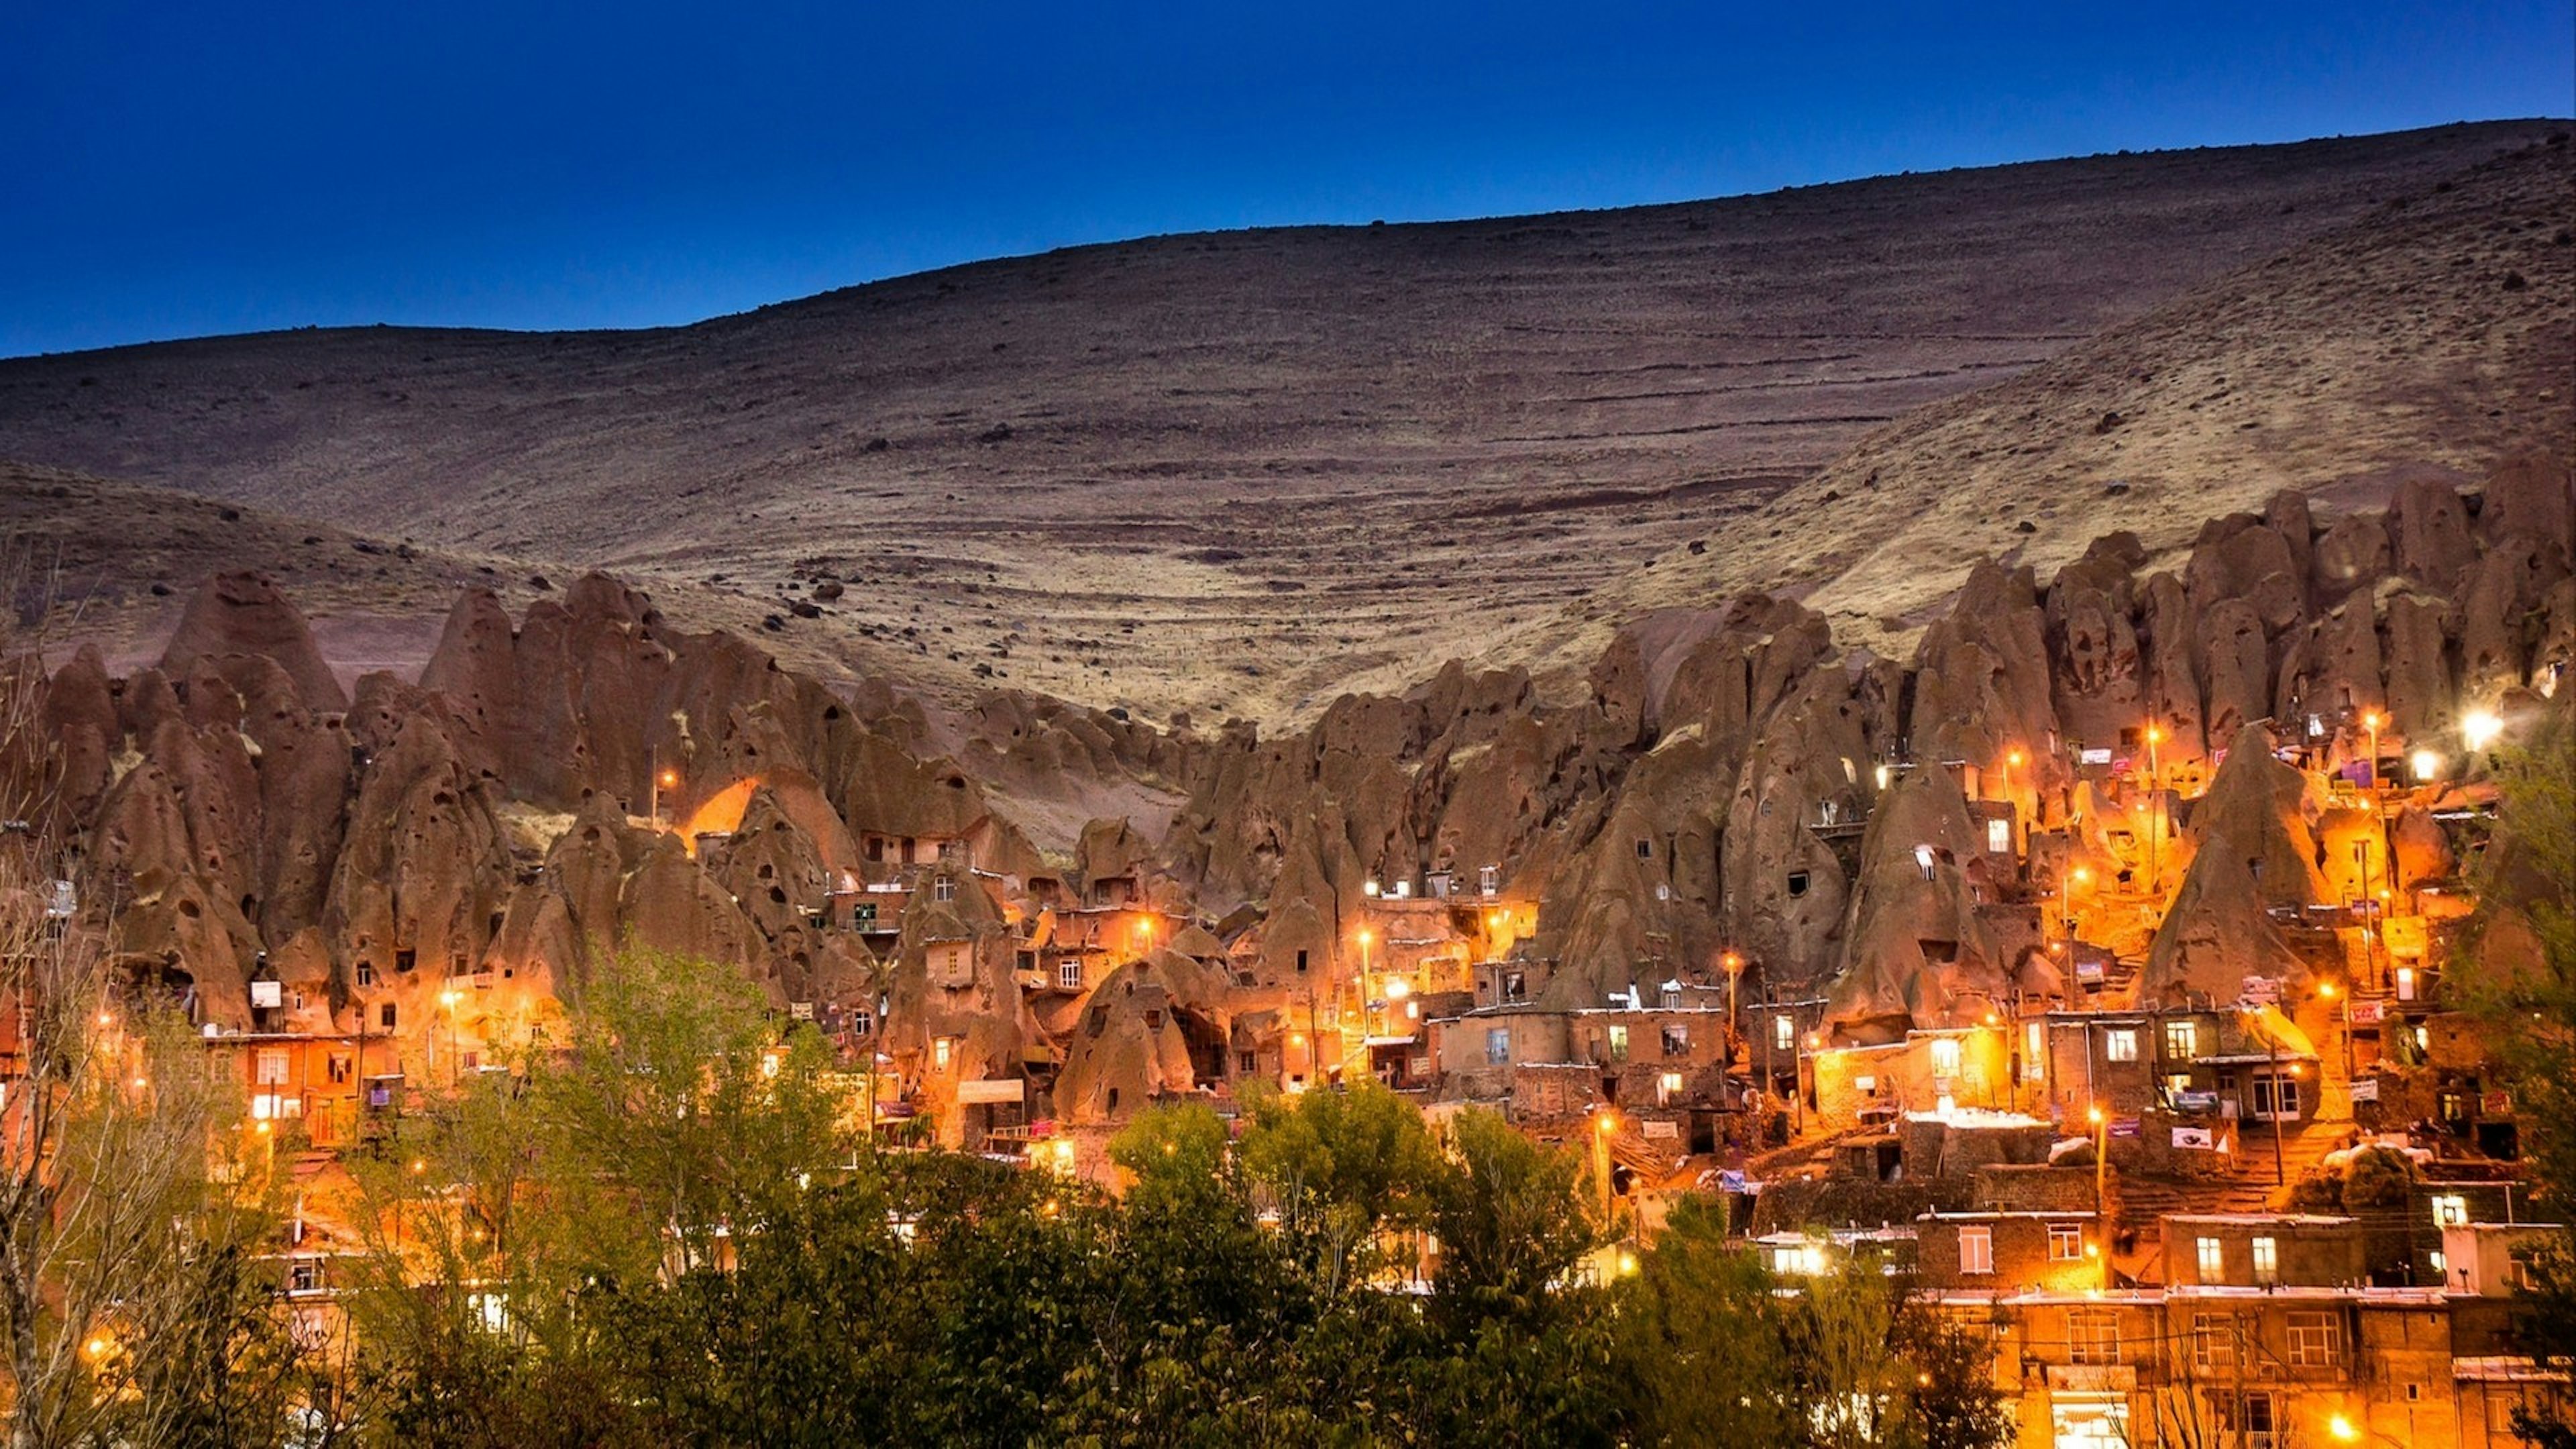 Cityscape image of Kandovan village during twilight blue hour a tourist destination of troglodyte dwellings in East Azarbaijan